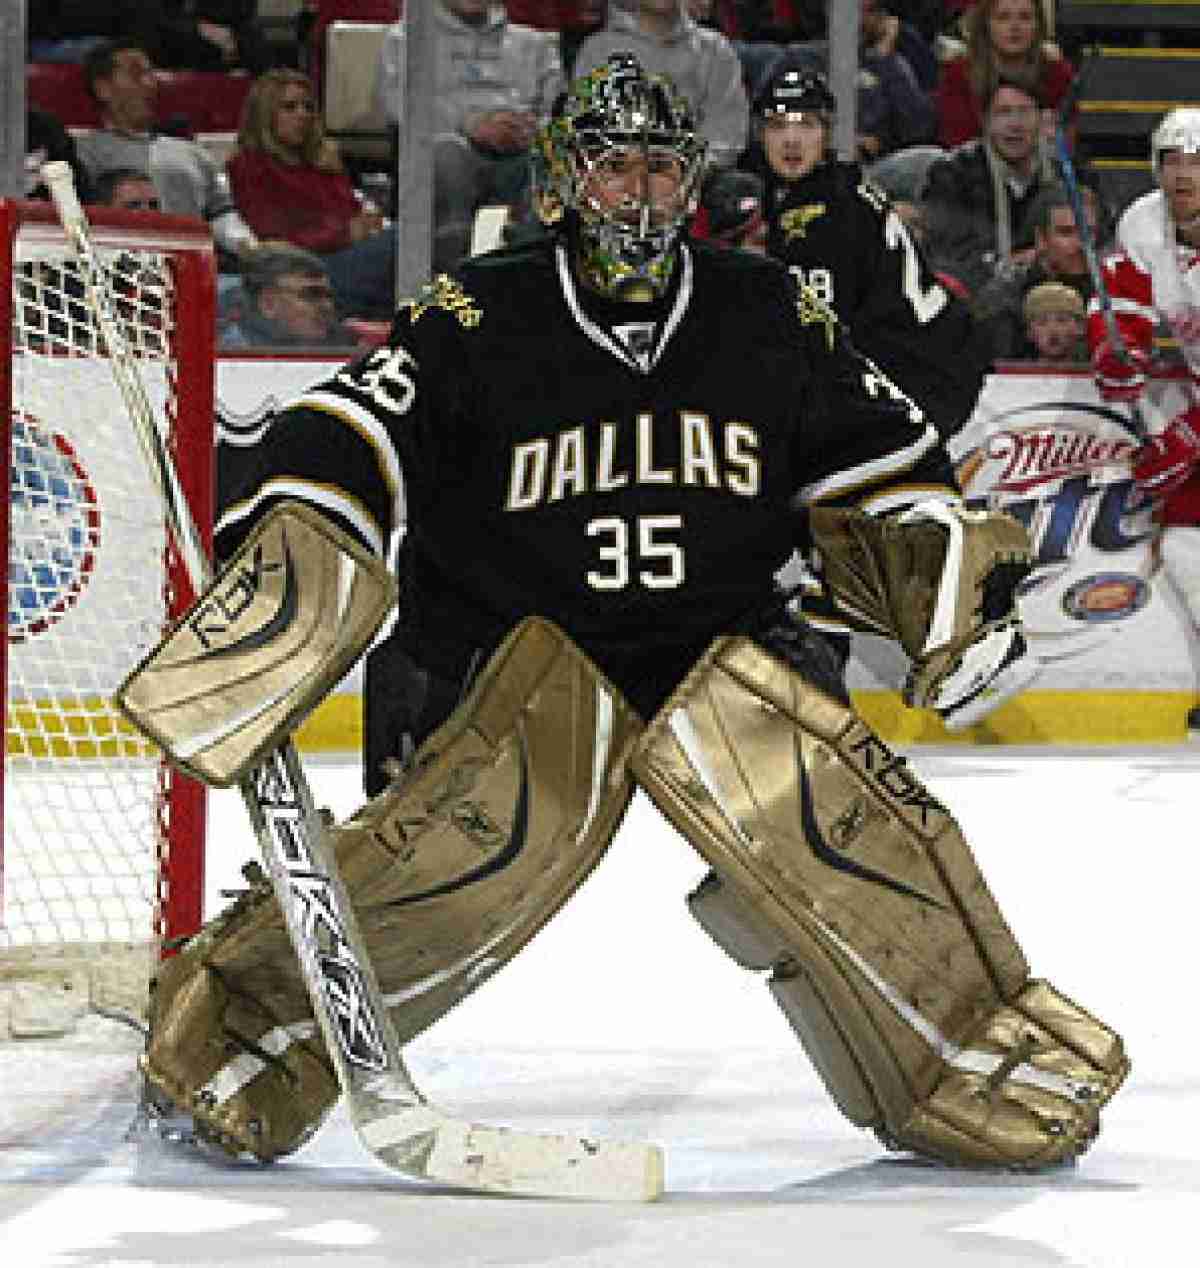 Images of goalie Marty Turco